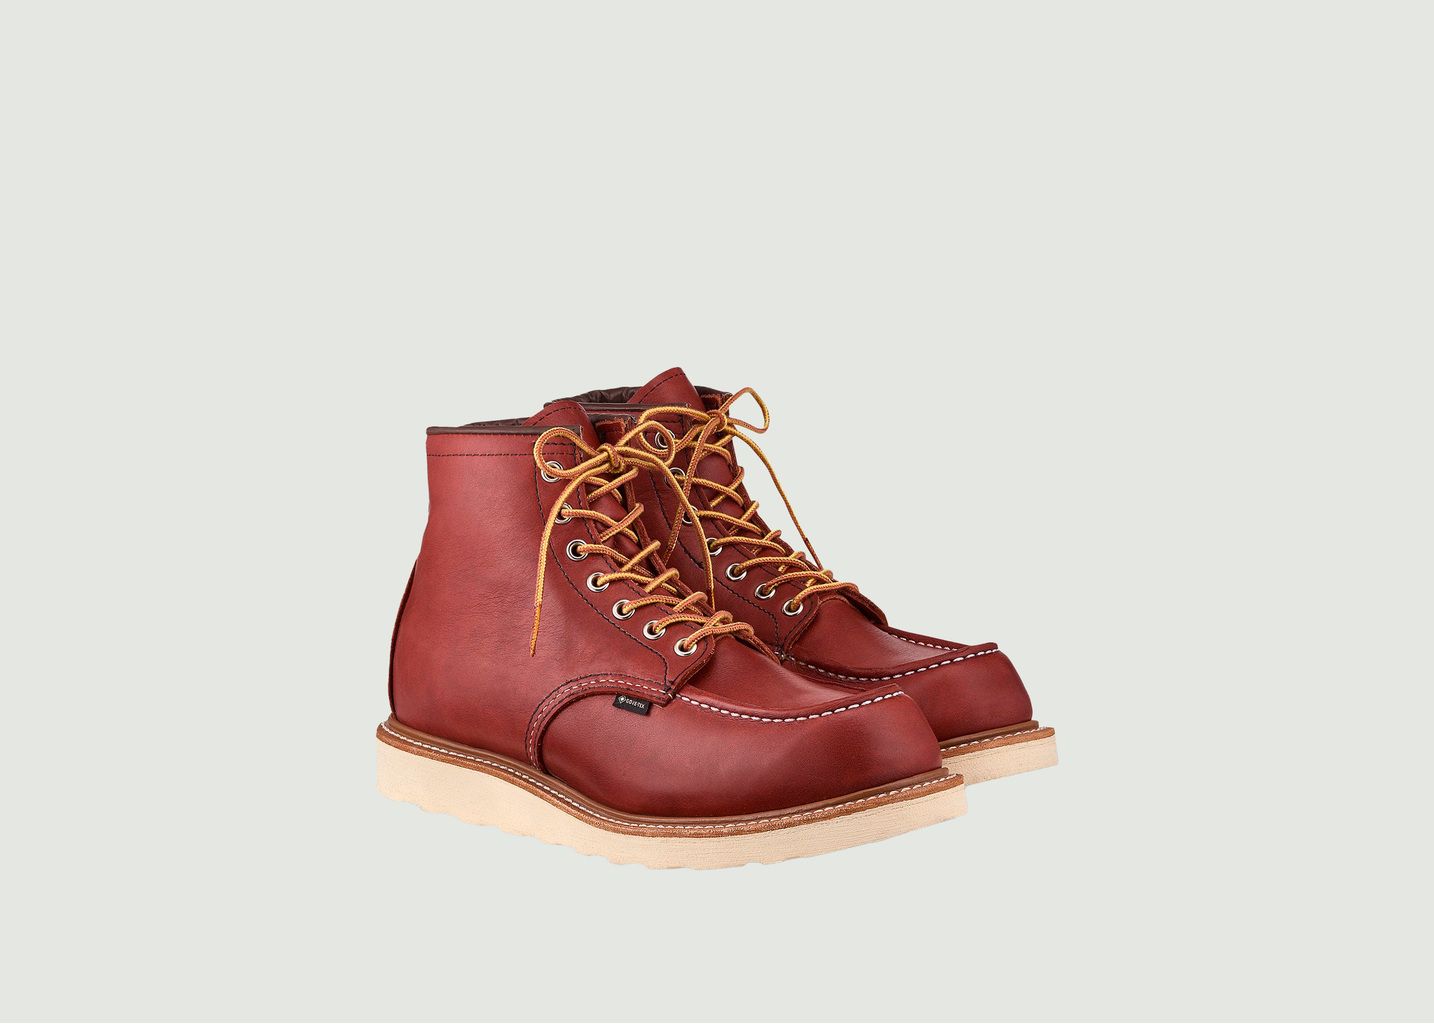 Chaussures Moc Toe				 - Red Wing Shoes